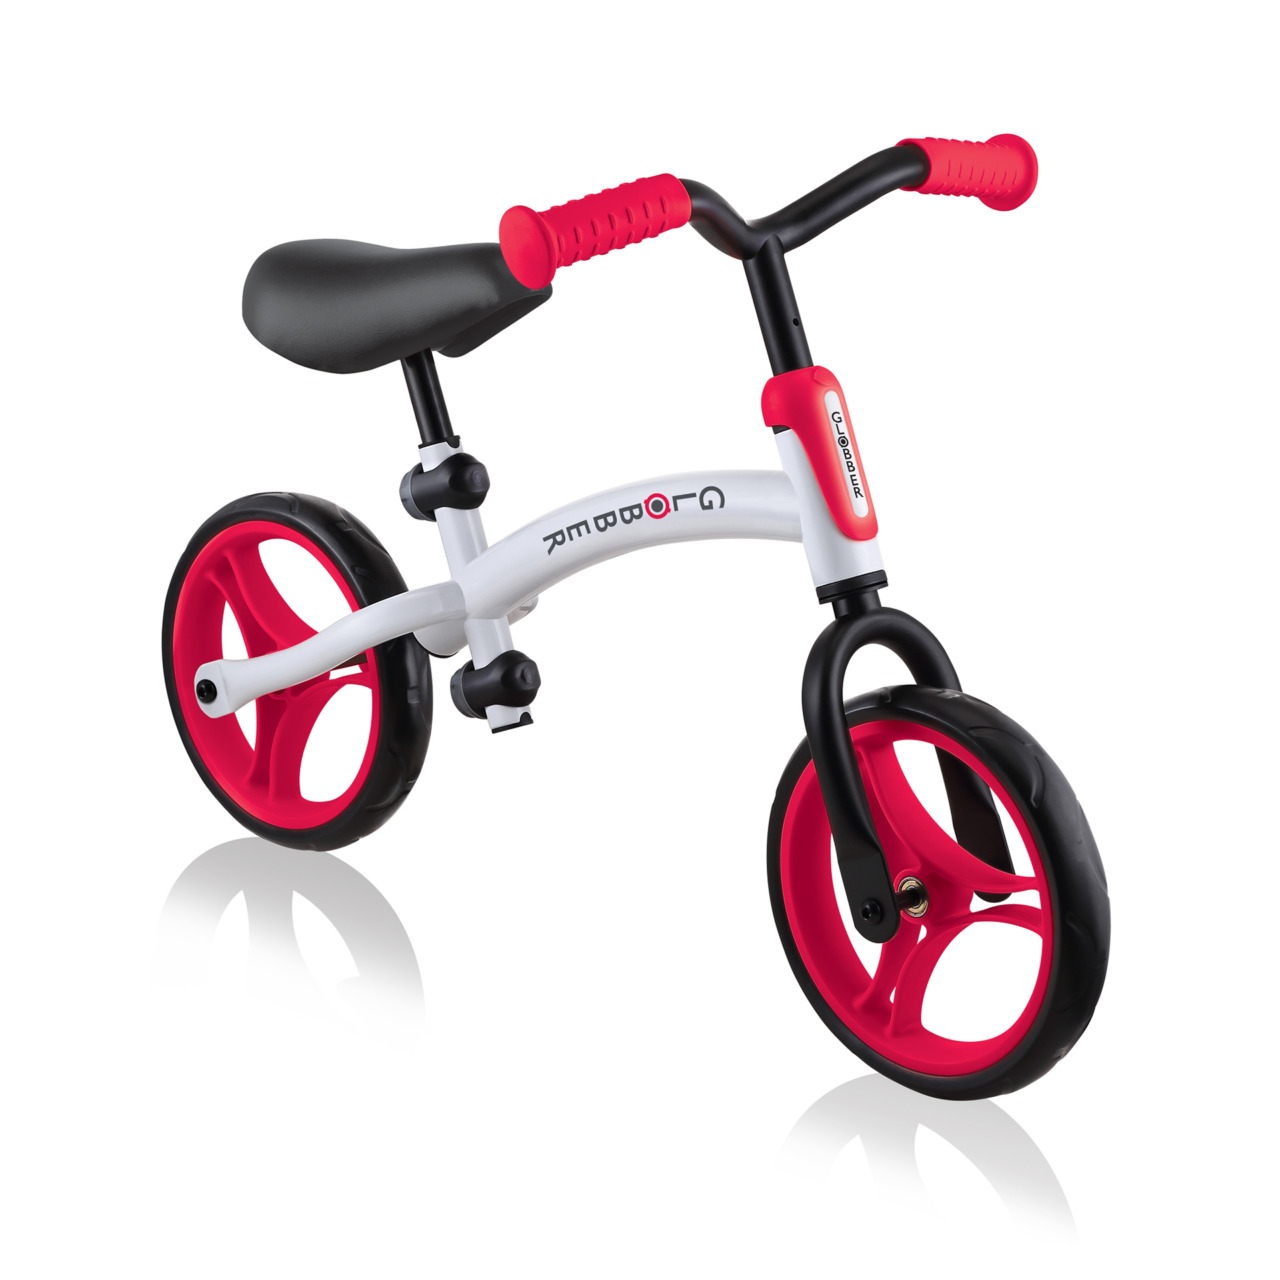 614 202 2 Best Convertible Balance Bike With Reversible Frame